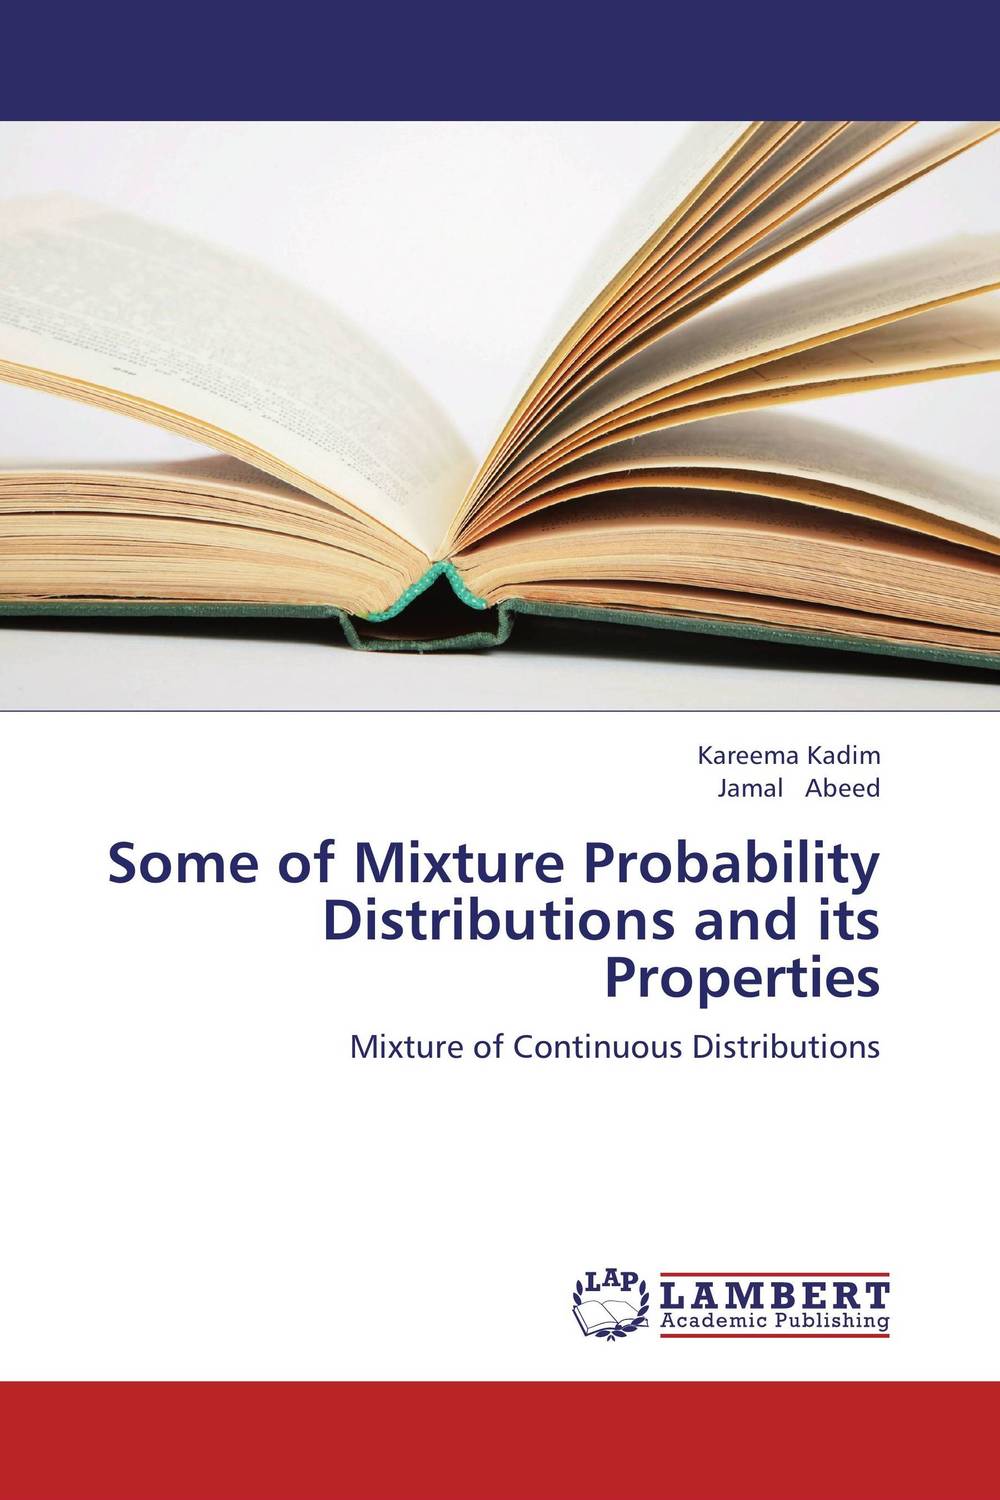 Some of Mixture Probability Distributions and its Properties